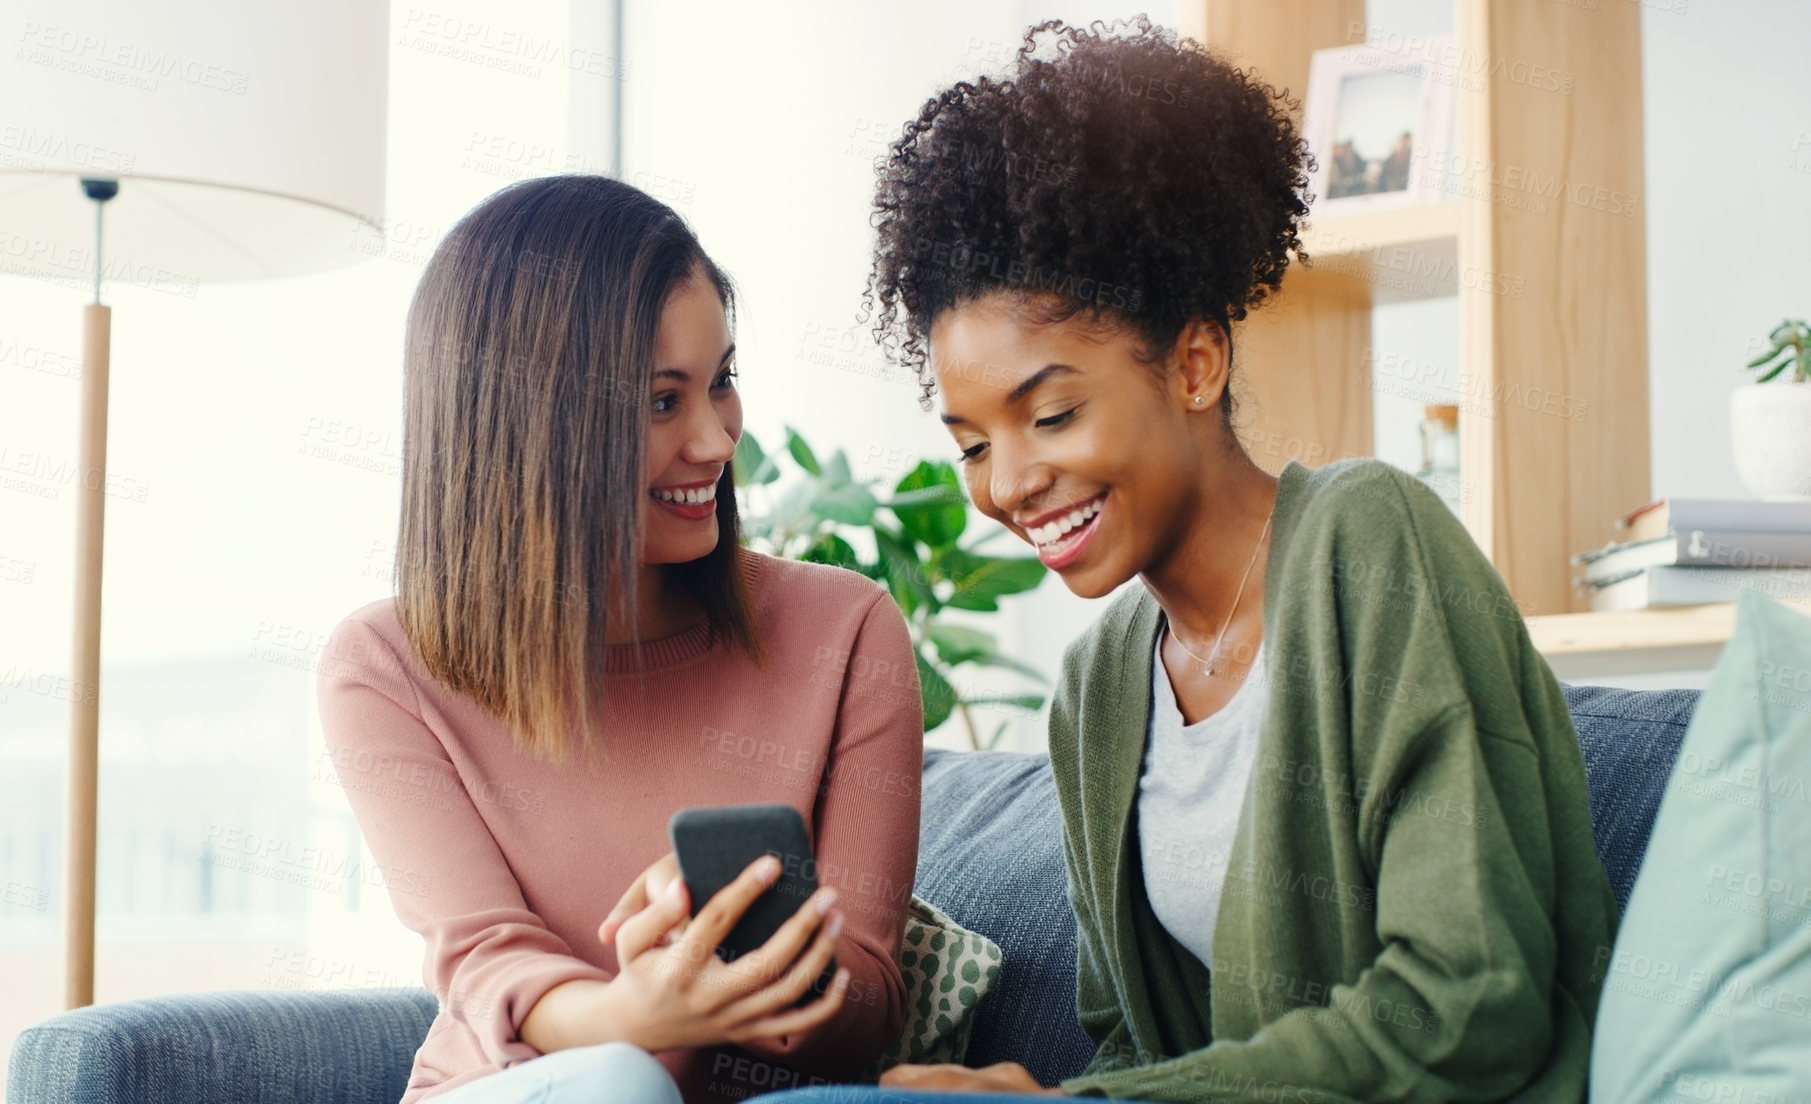 Buy stock photo Cropped shot of two attractive young women using a cellphone while sitting on the sofa in a living room